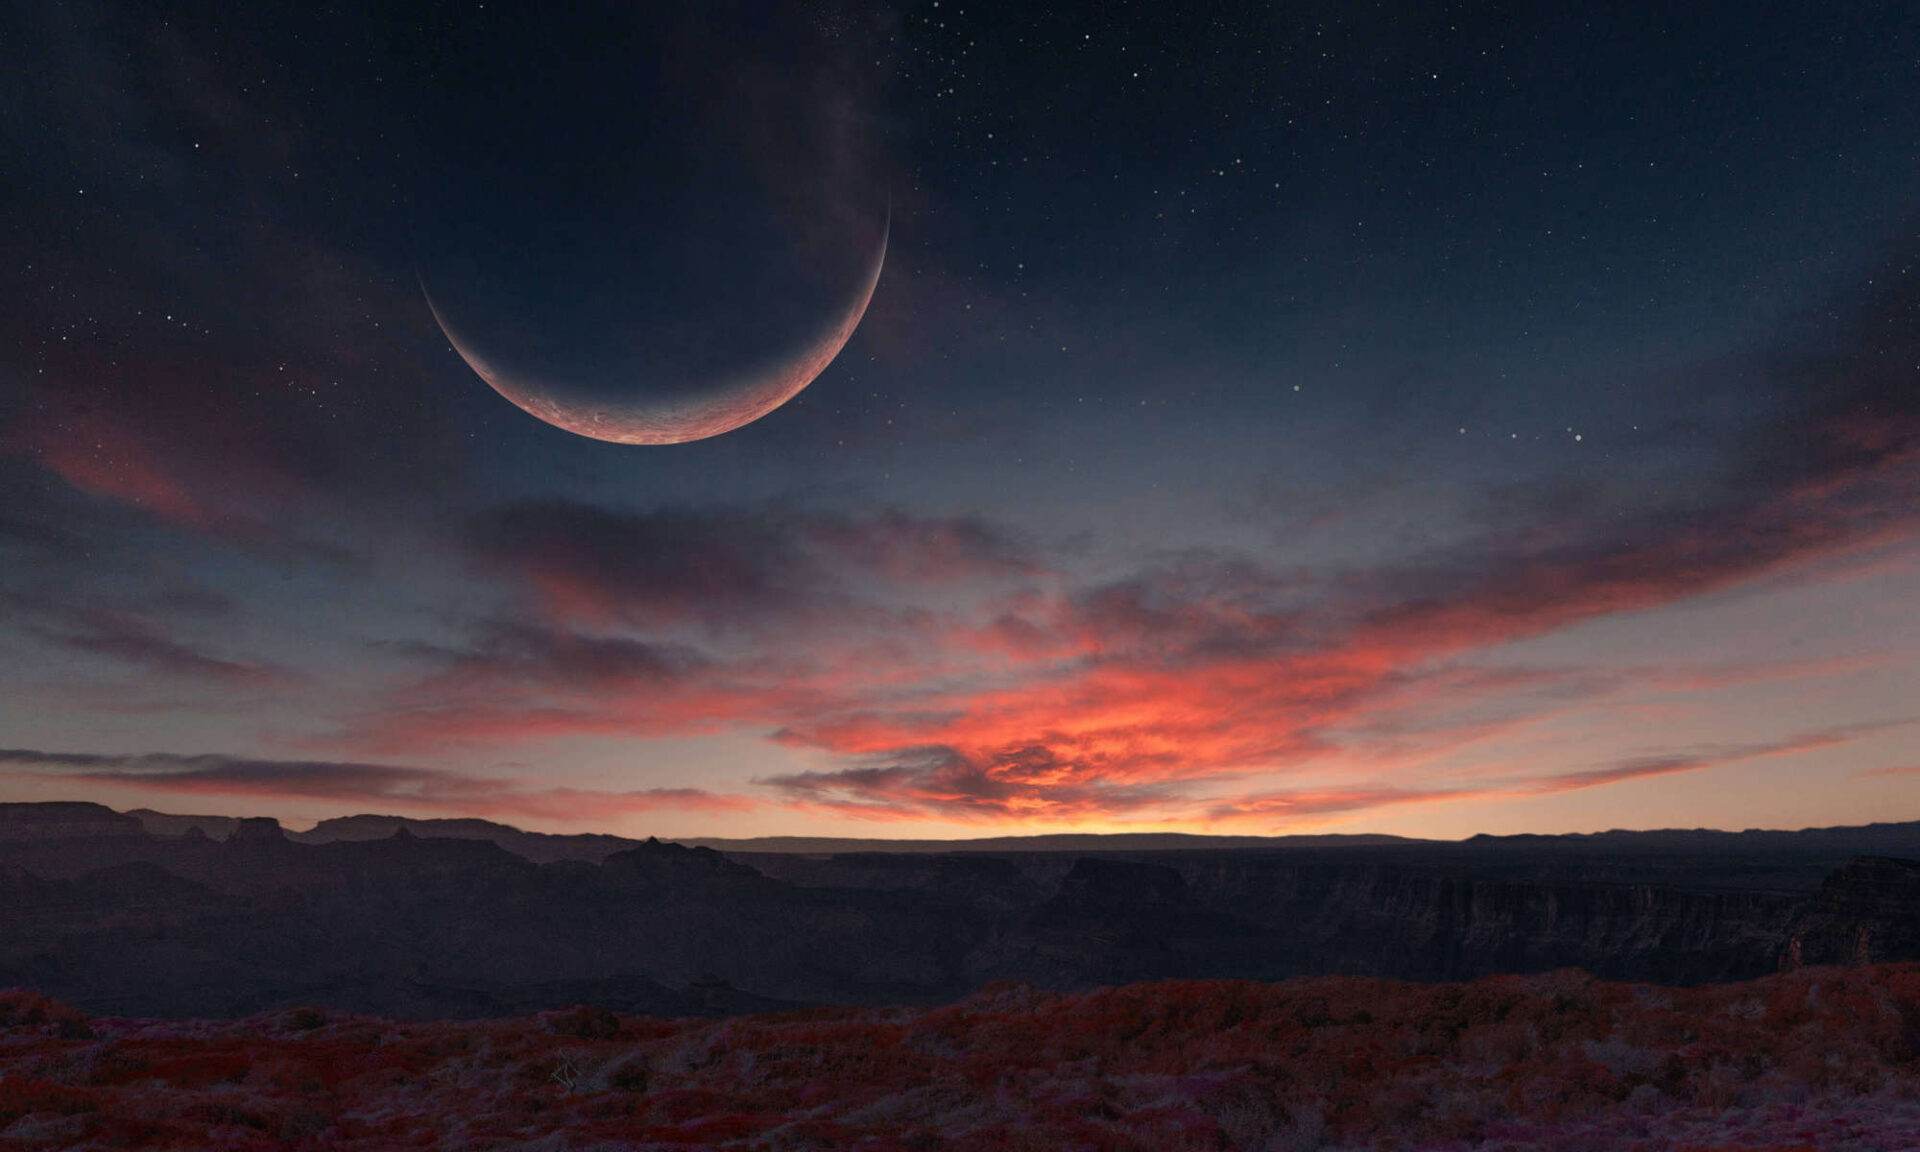 Photo illustration depicting a rocky Earth-like landscape with the orange-pink light of a setting sun reflecting off a large moon likely formed with the limited role of streaming instability.